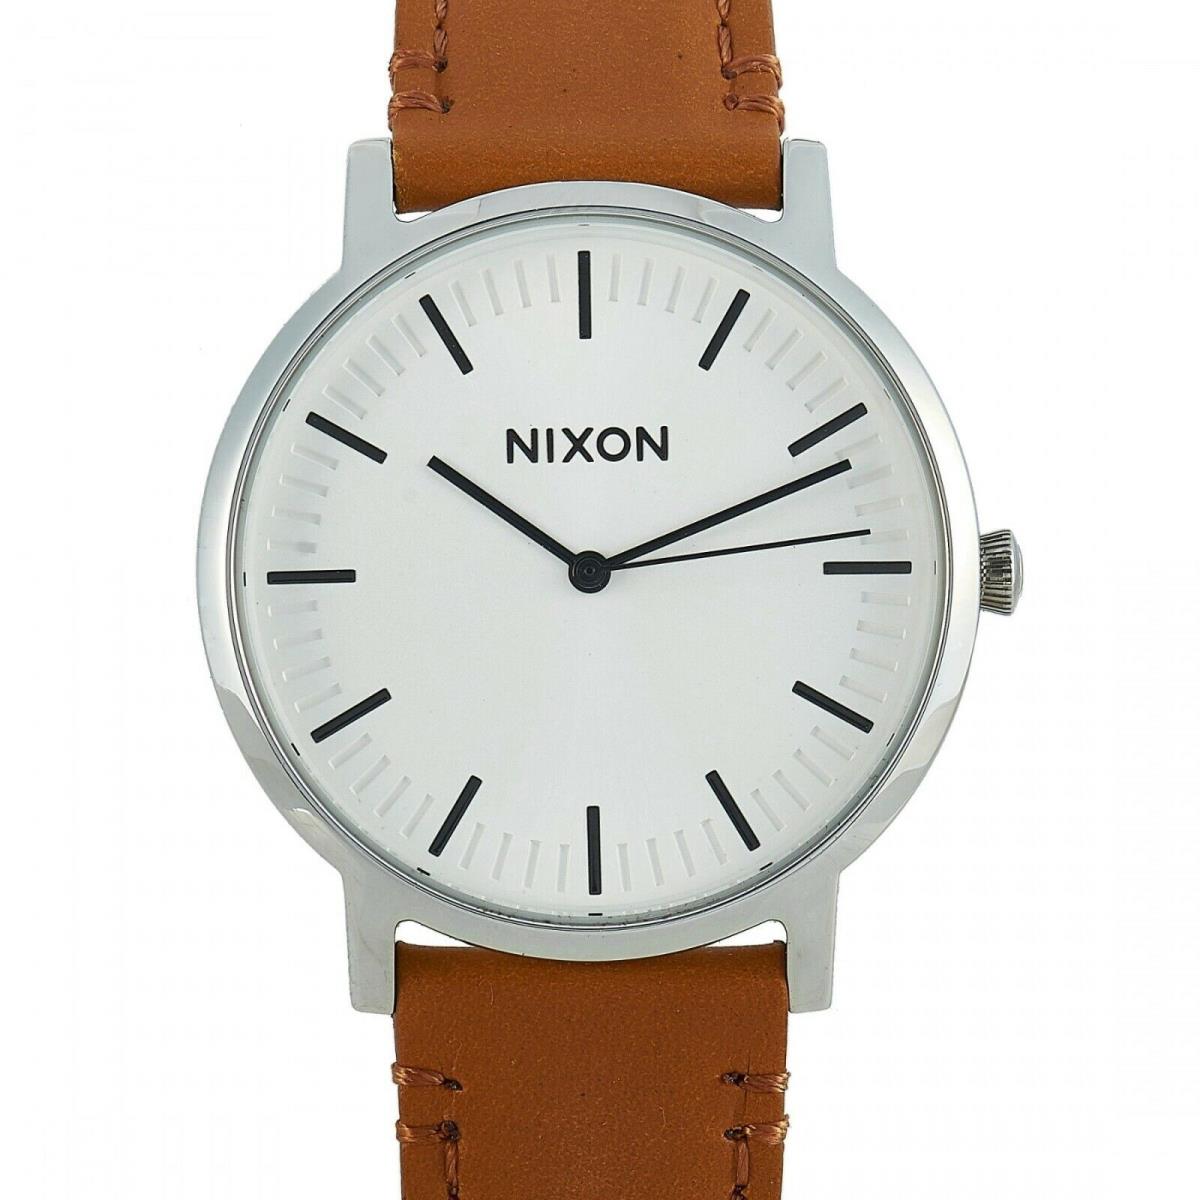 Nixon Porter Brown Leather Unisex Watch A1058-2442 - Dial: White, Band: Brown